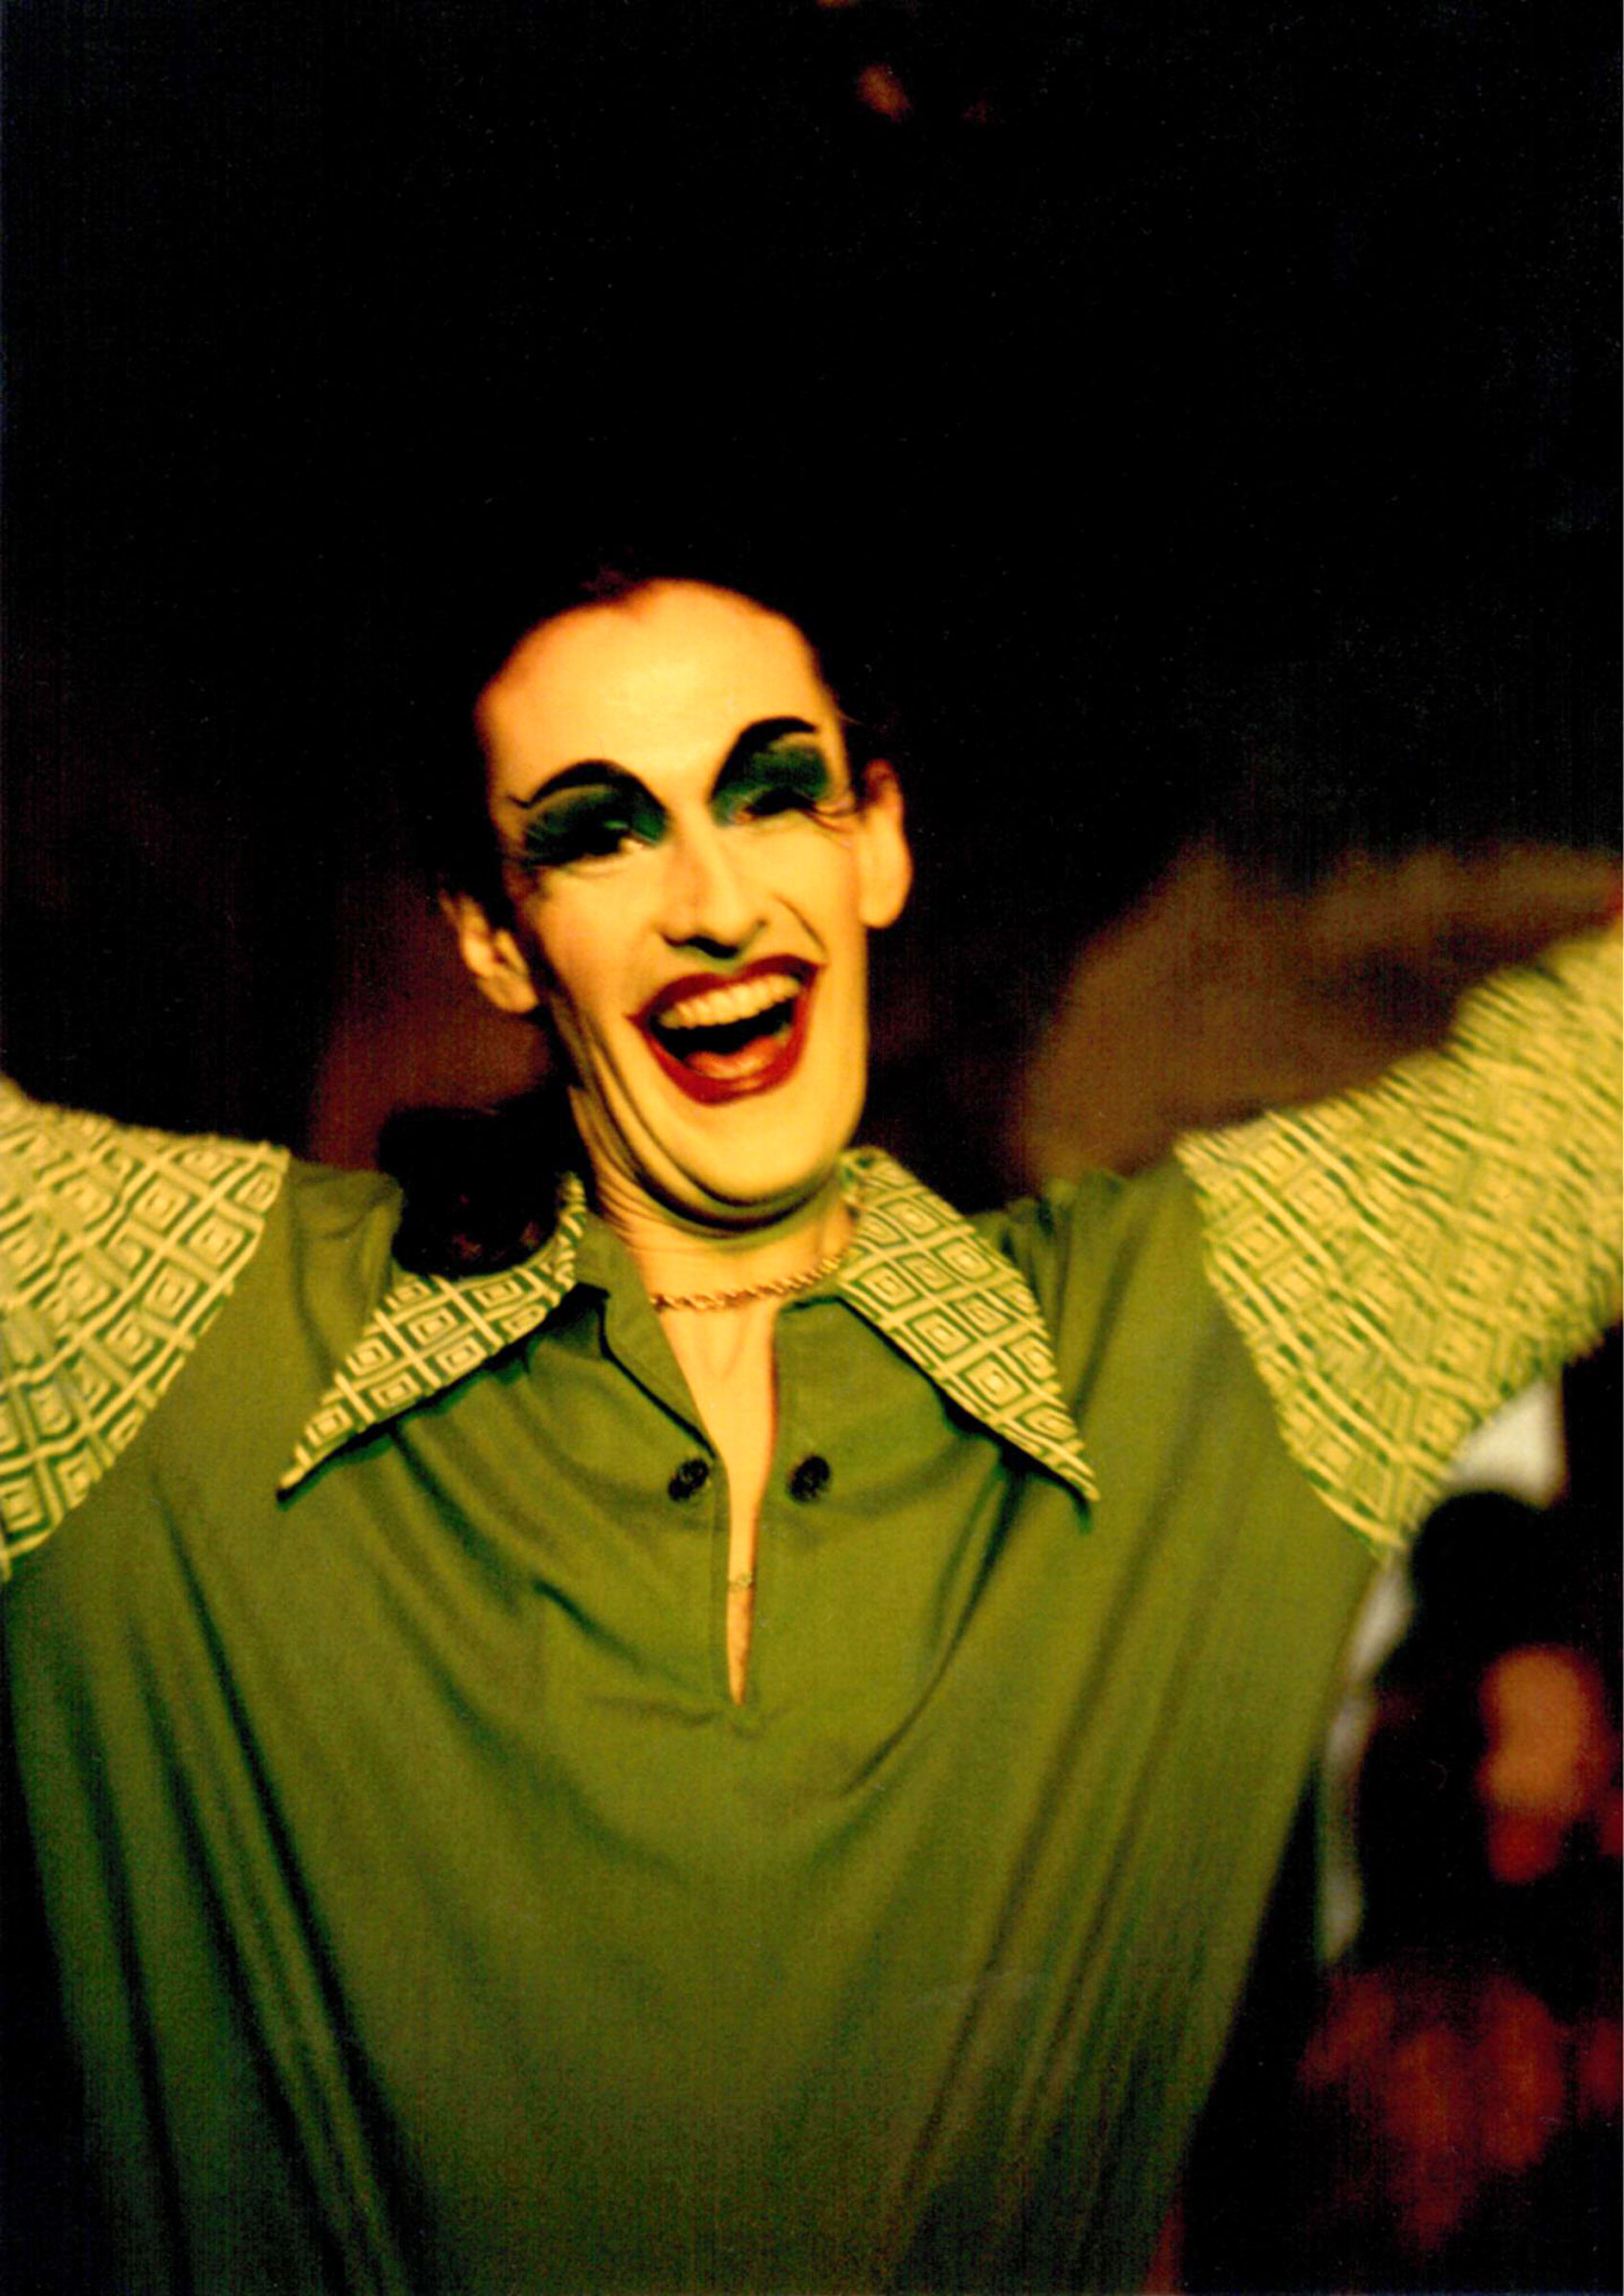 1995-01-19-SF-Tales-of-the-Unexpected-Candid-Cafe-02-Danny-Arms